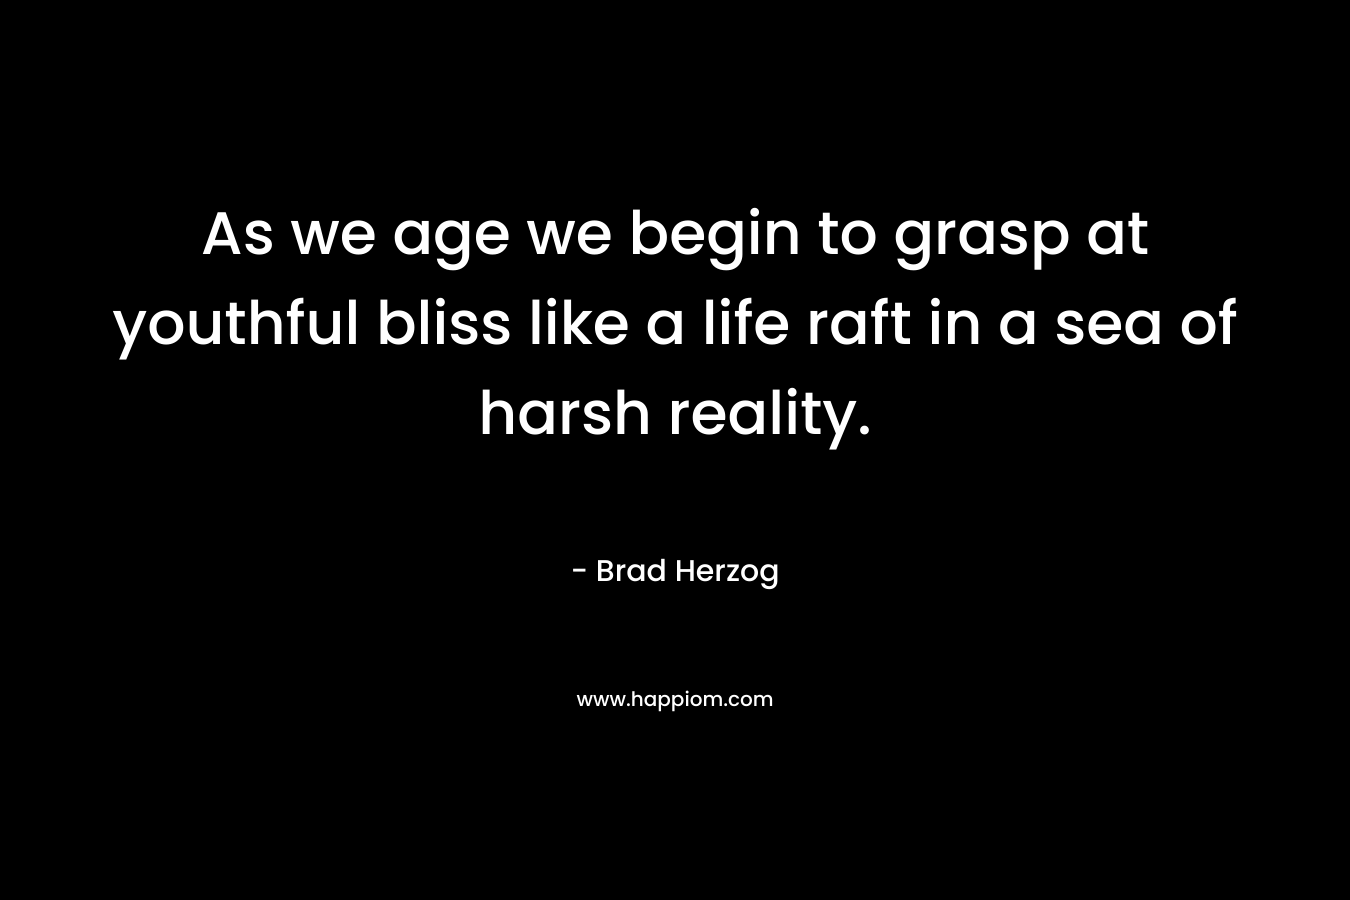 As we age we begin to grasp at youthful bliss like a life raft in a sea of harsh reality.